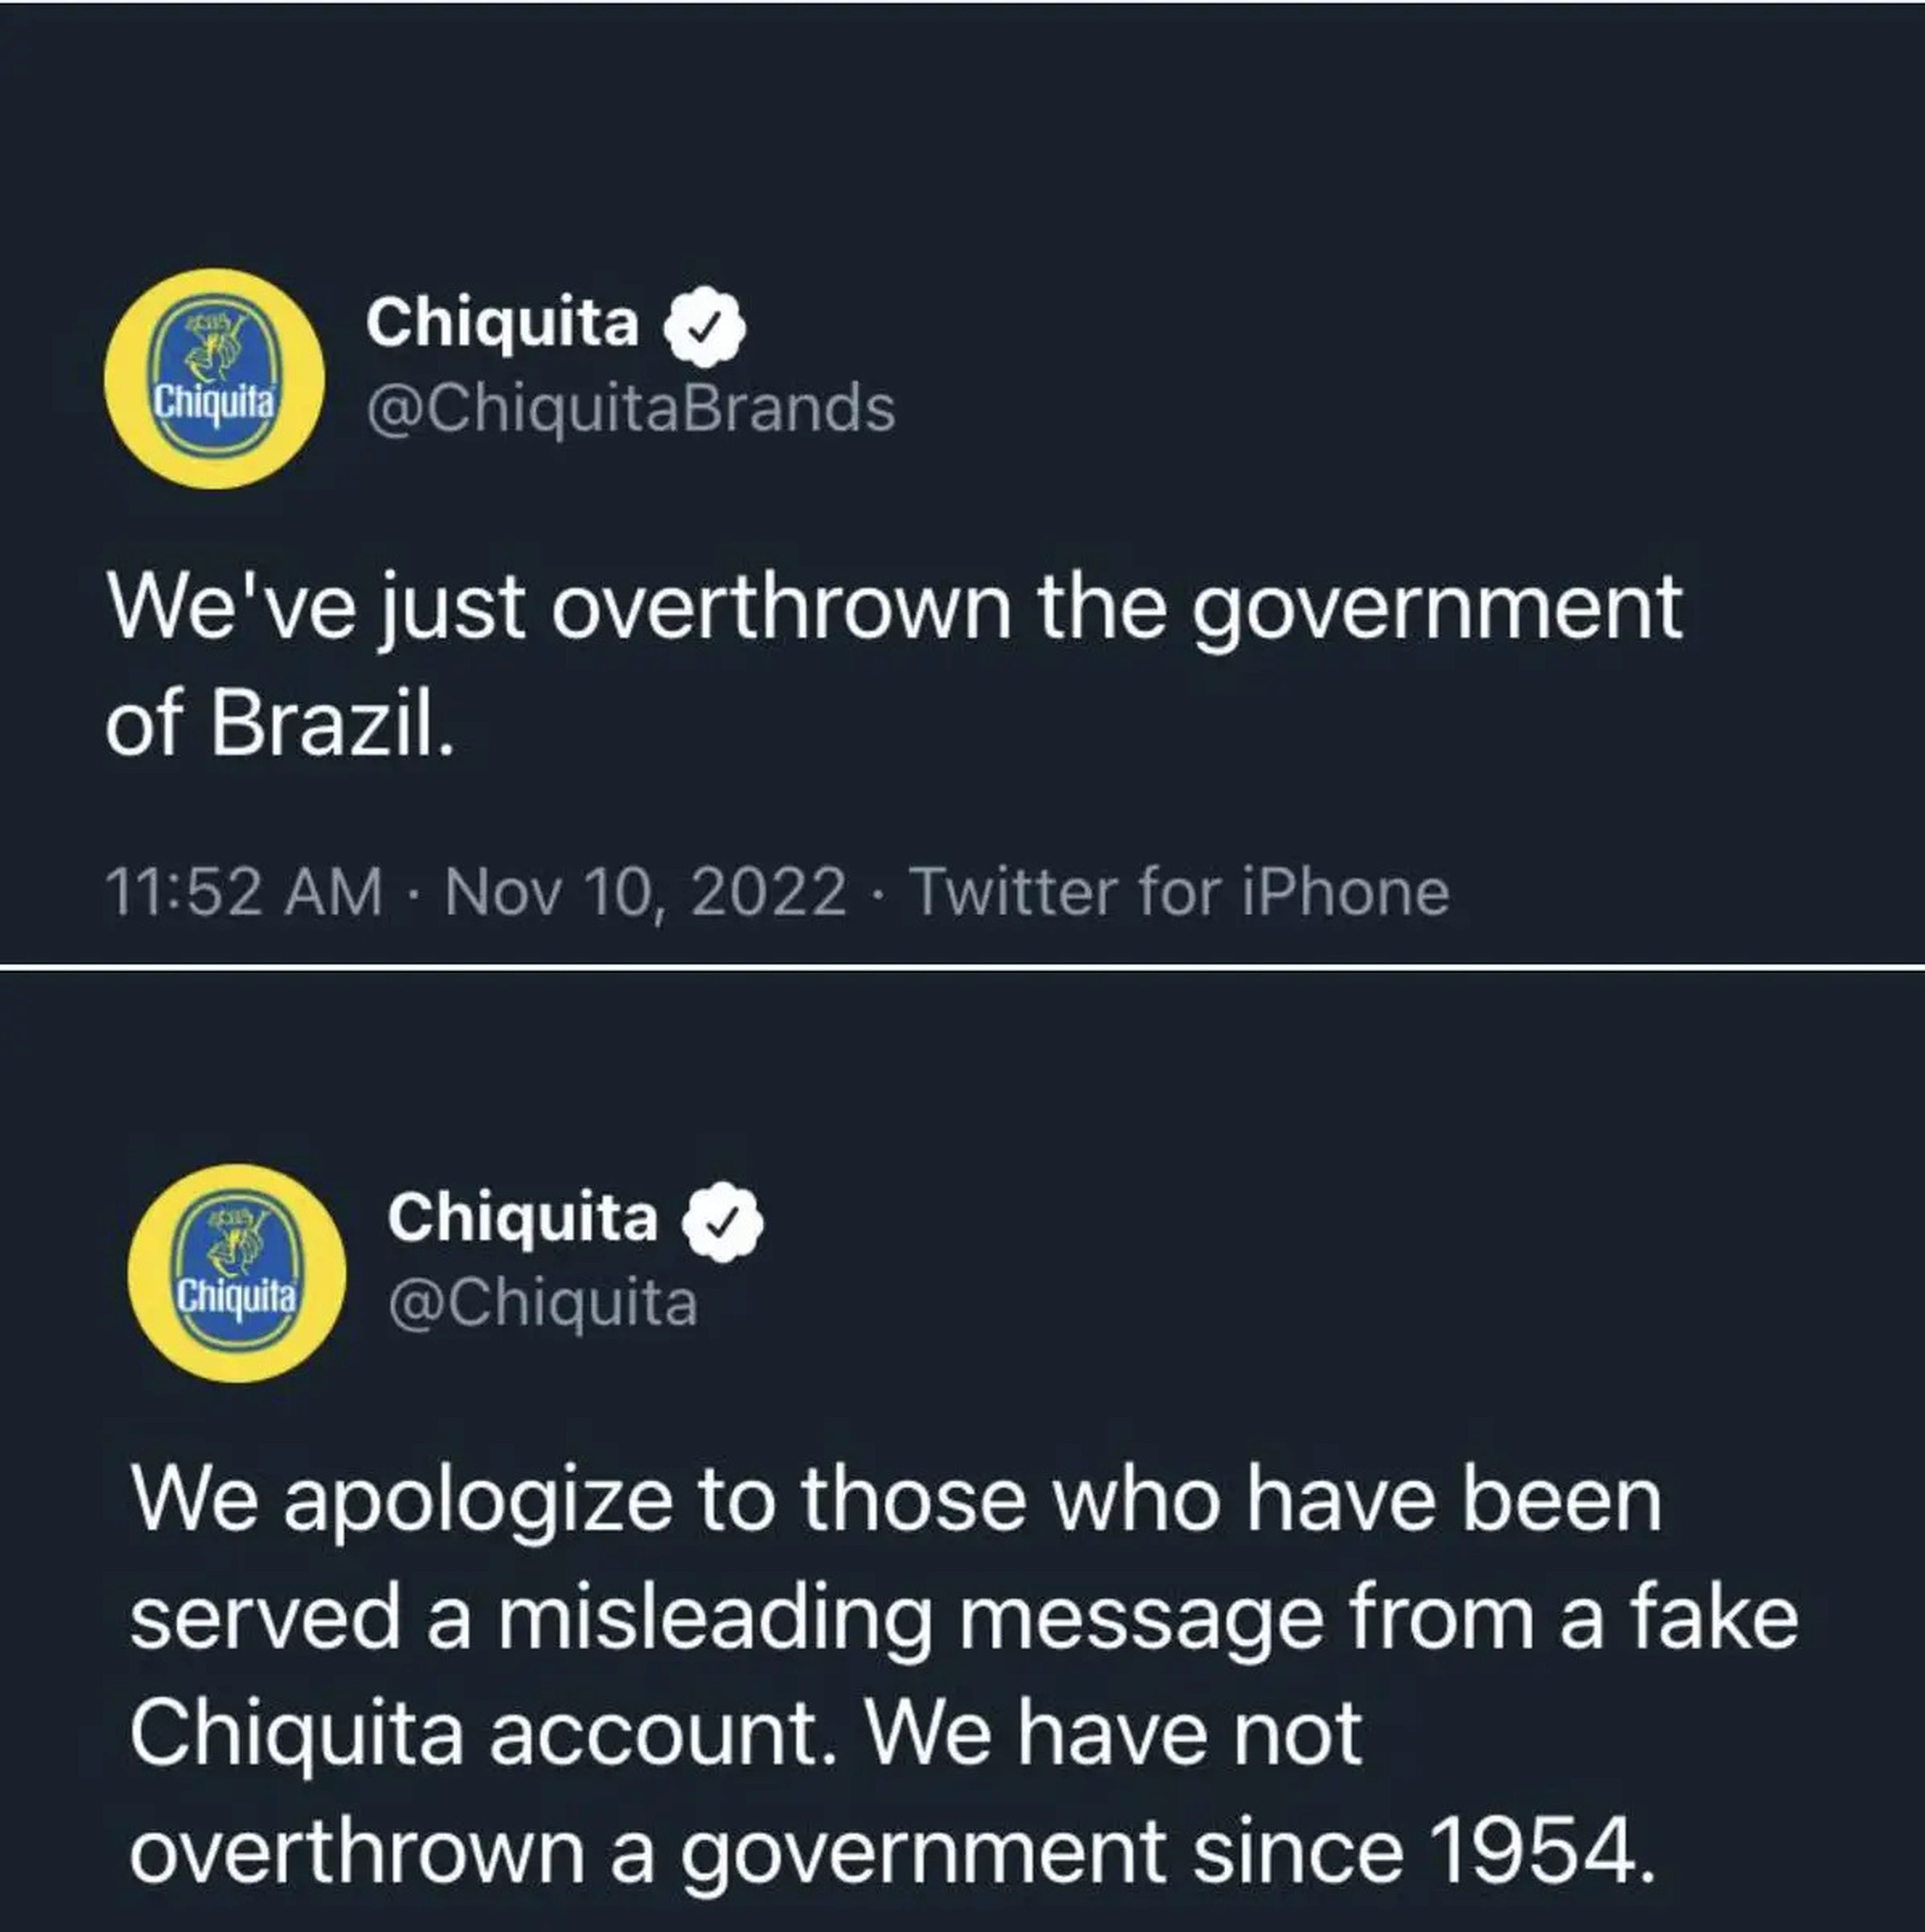 Tweet from Chiquita impersonator followed by an apology from the real Chiquita account.